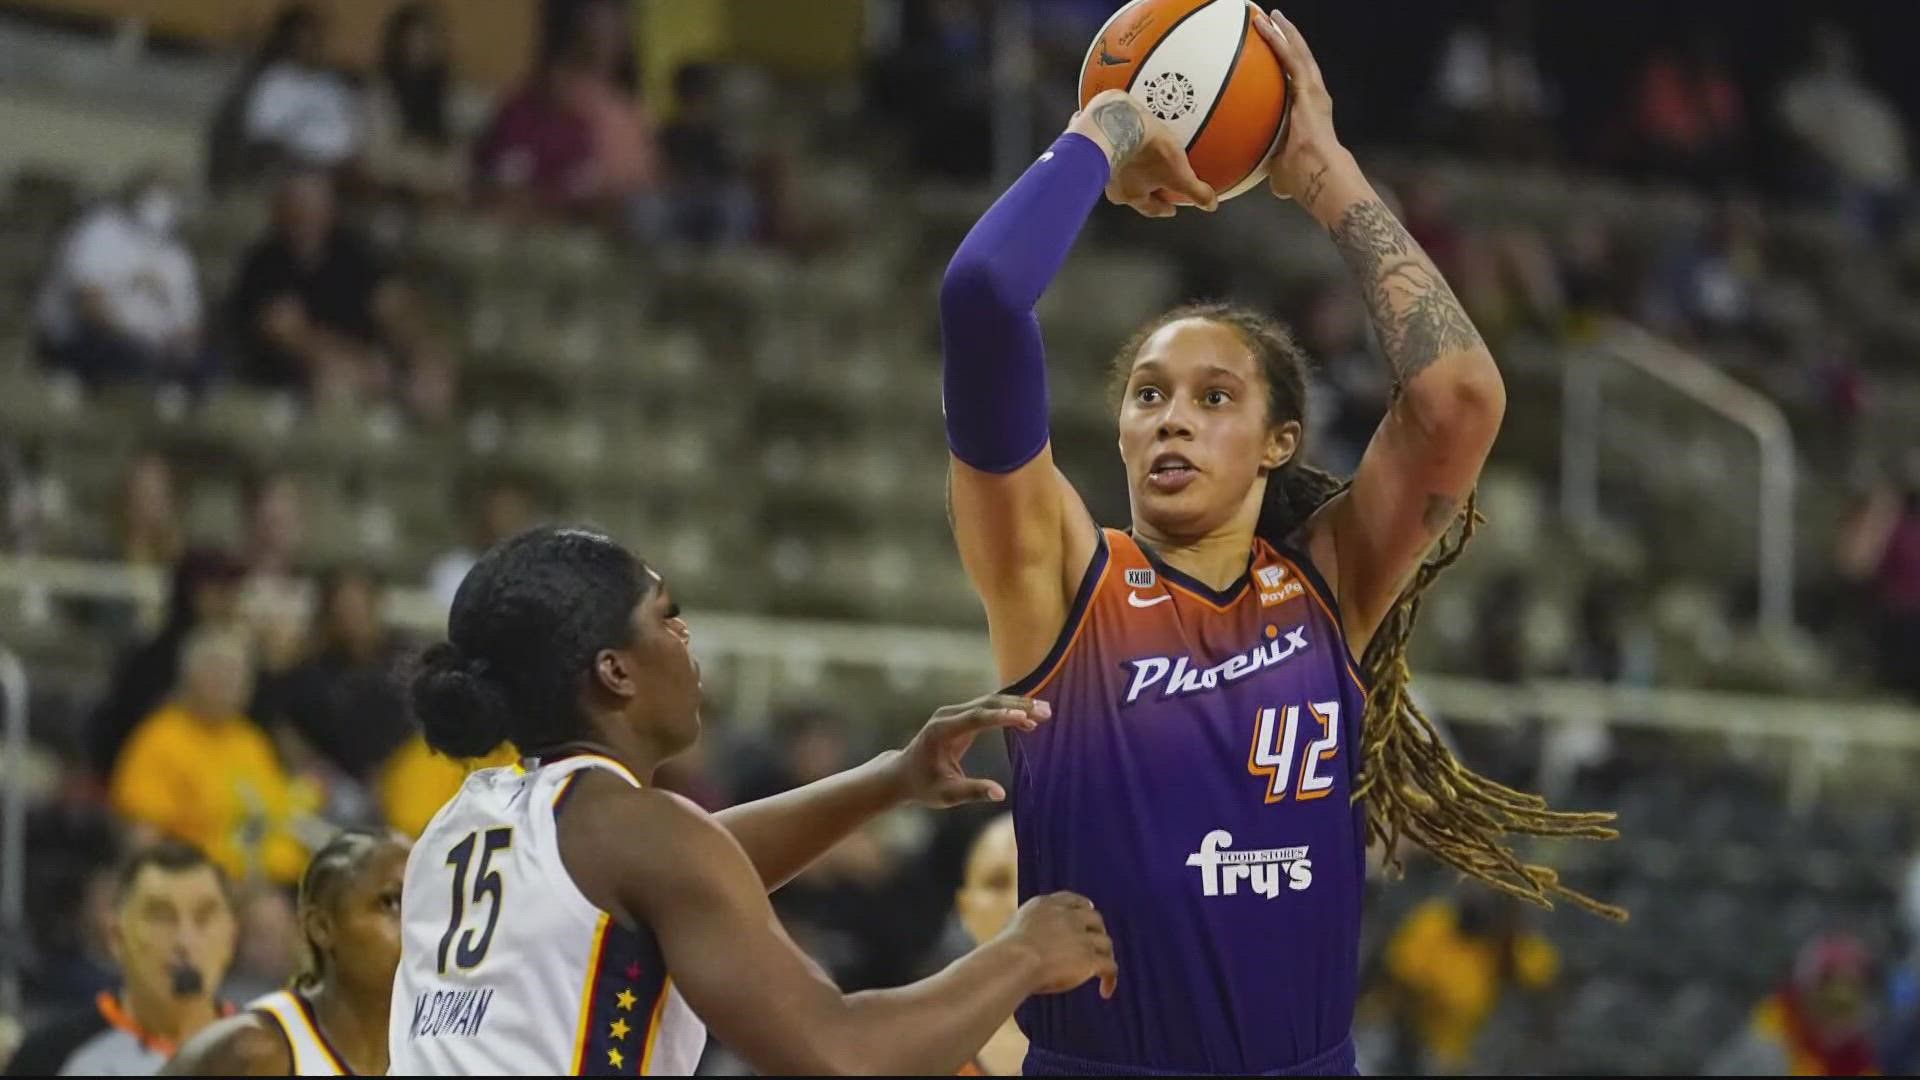 Phoenix Mercury star Brittney Griner will attend a preliminary court hearing in the Moscow region Monday, her lawyer says